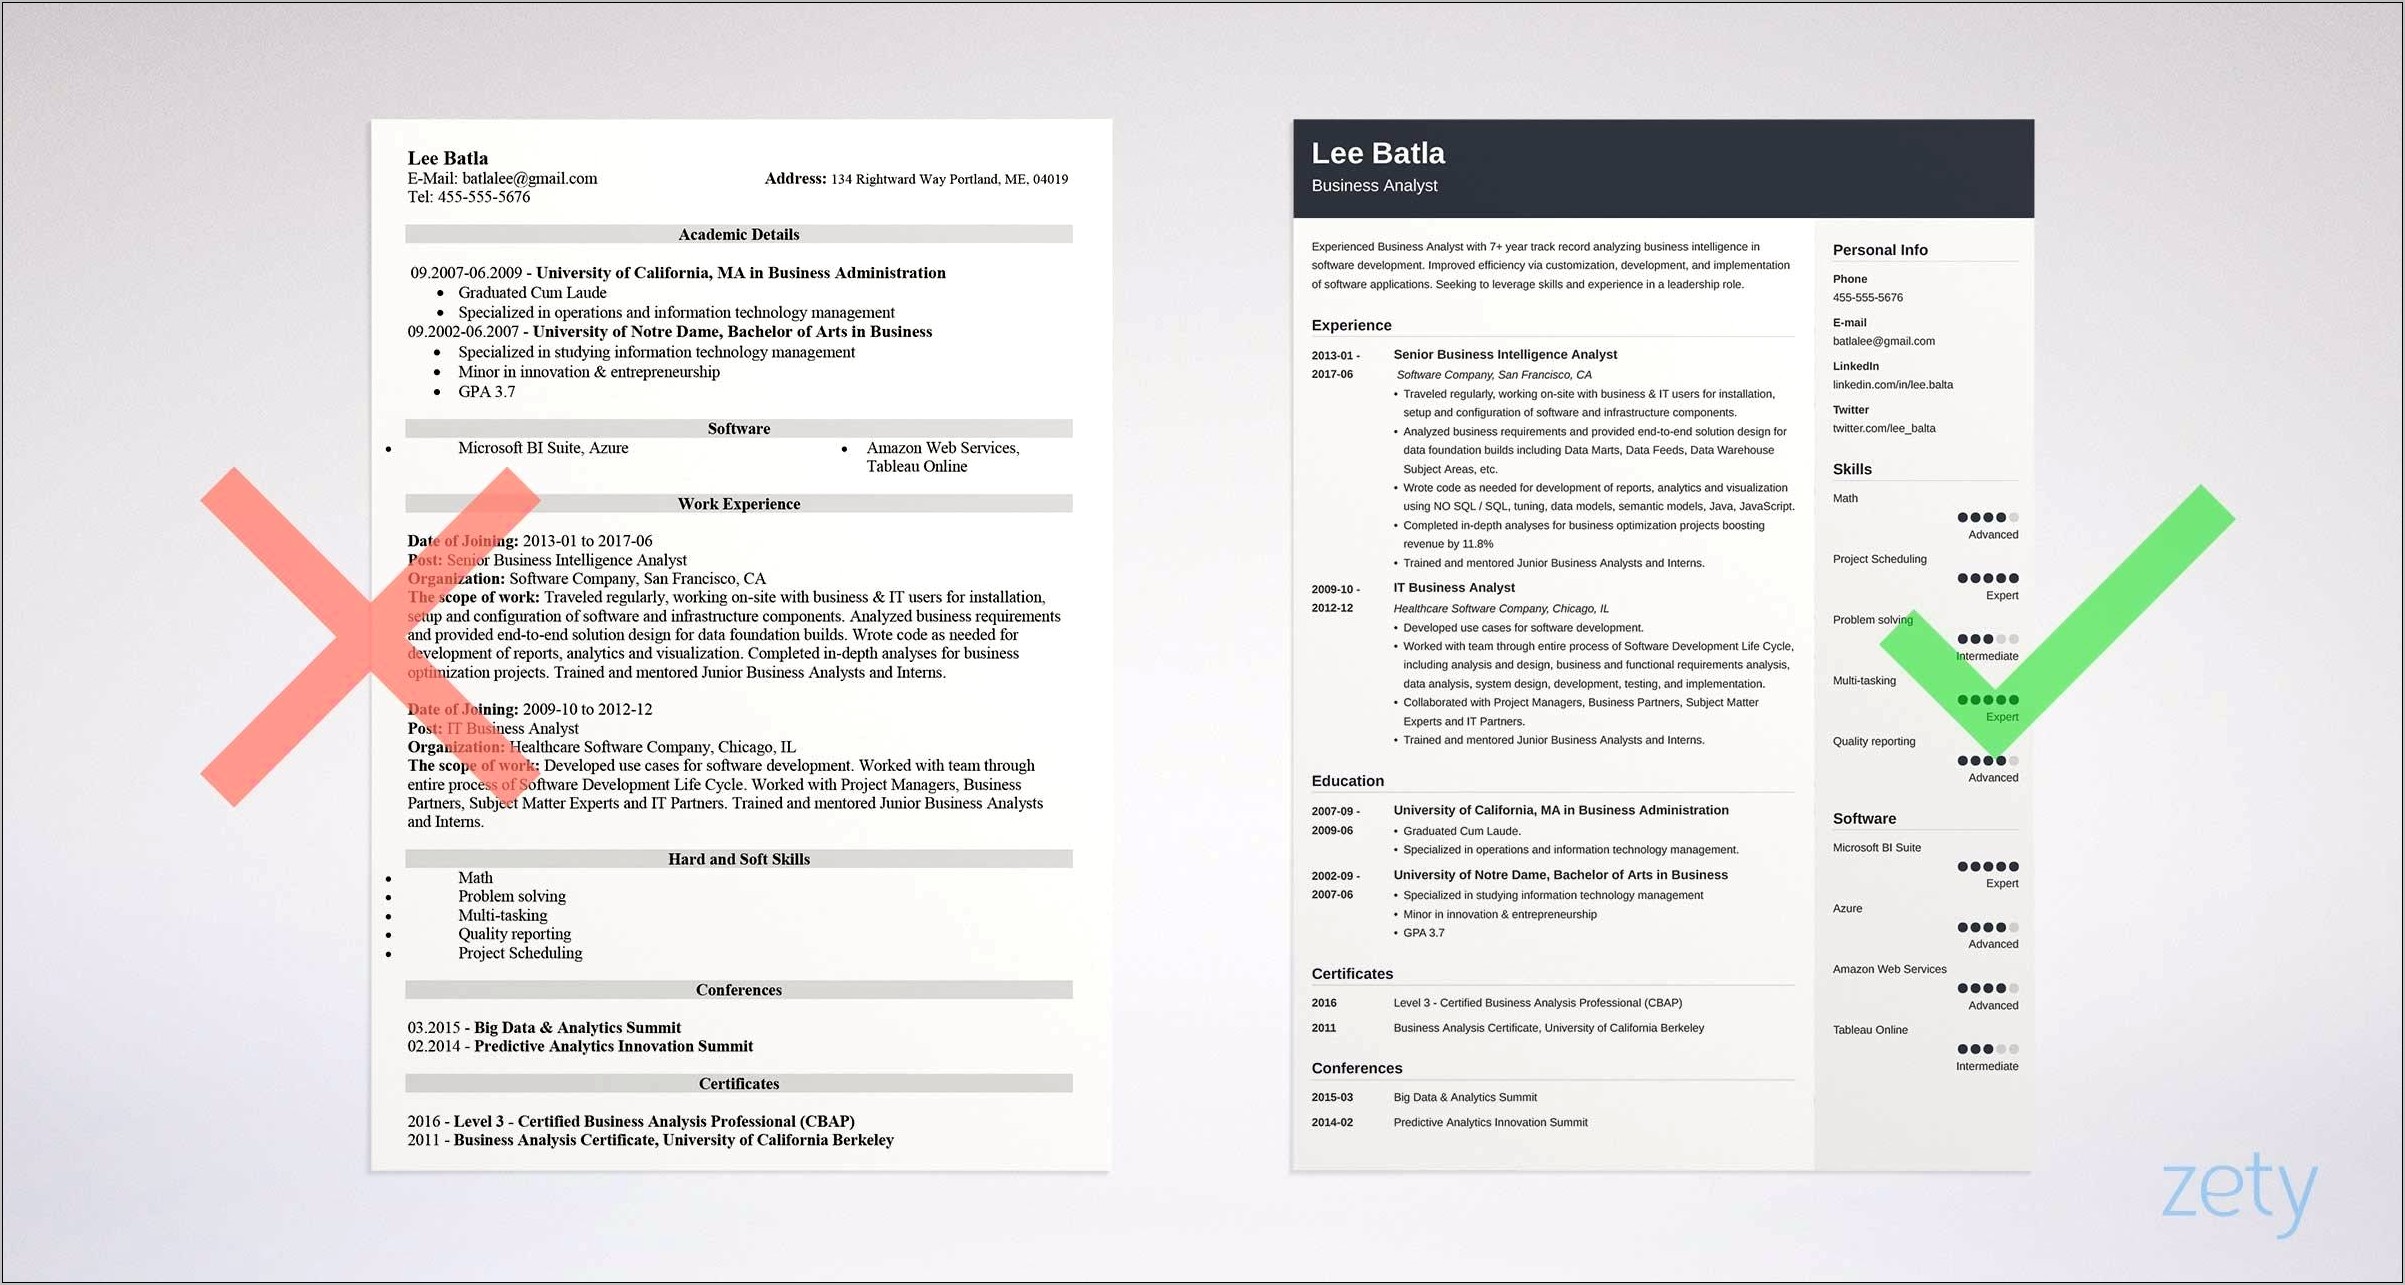 Fancy Job Titles For Resumes